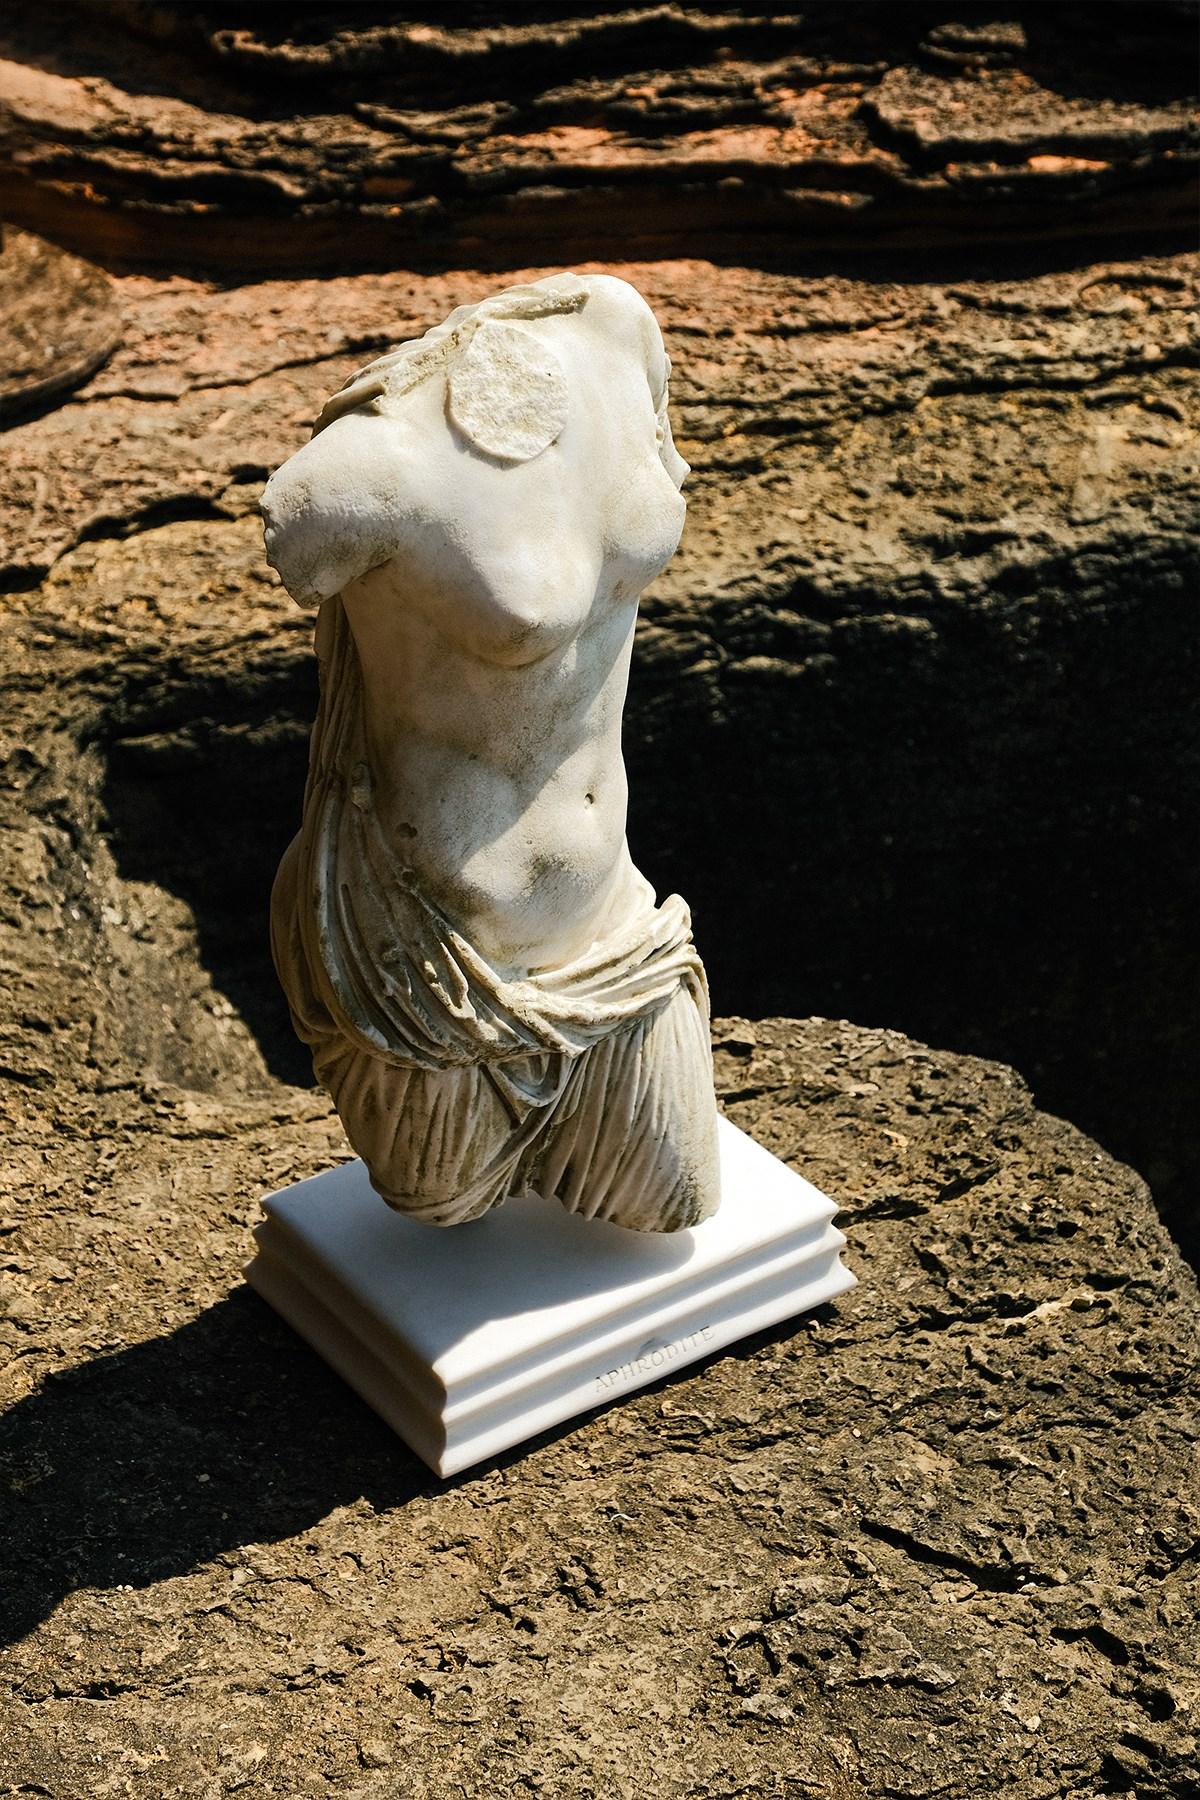 Aphrodite is known as the godess of love and beauty from Greek mythology. In Roman mythology she is called Venus. The original is displayed in the Ephesus Museum.

Lagu's special selection carries the most important sculptures in world history to